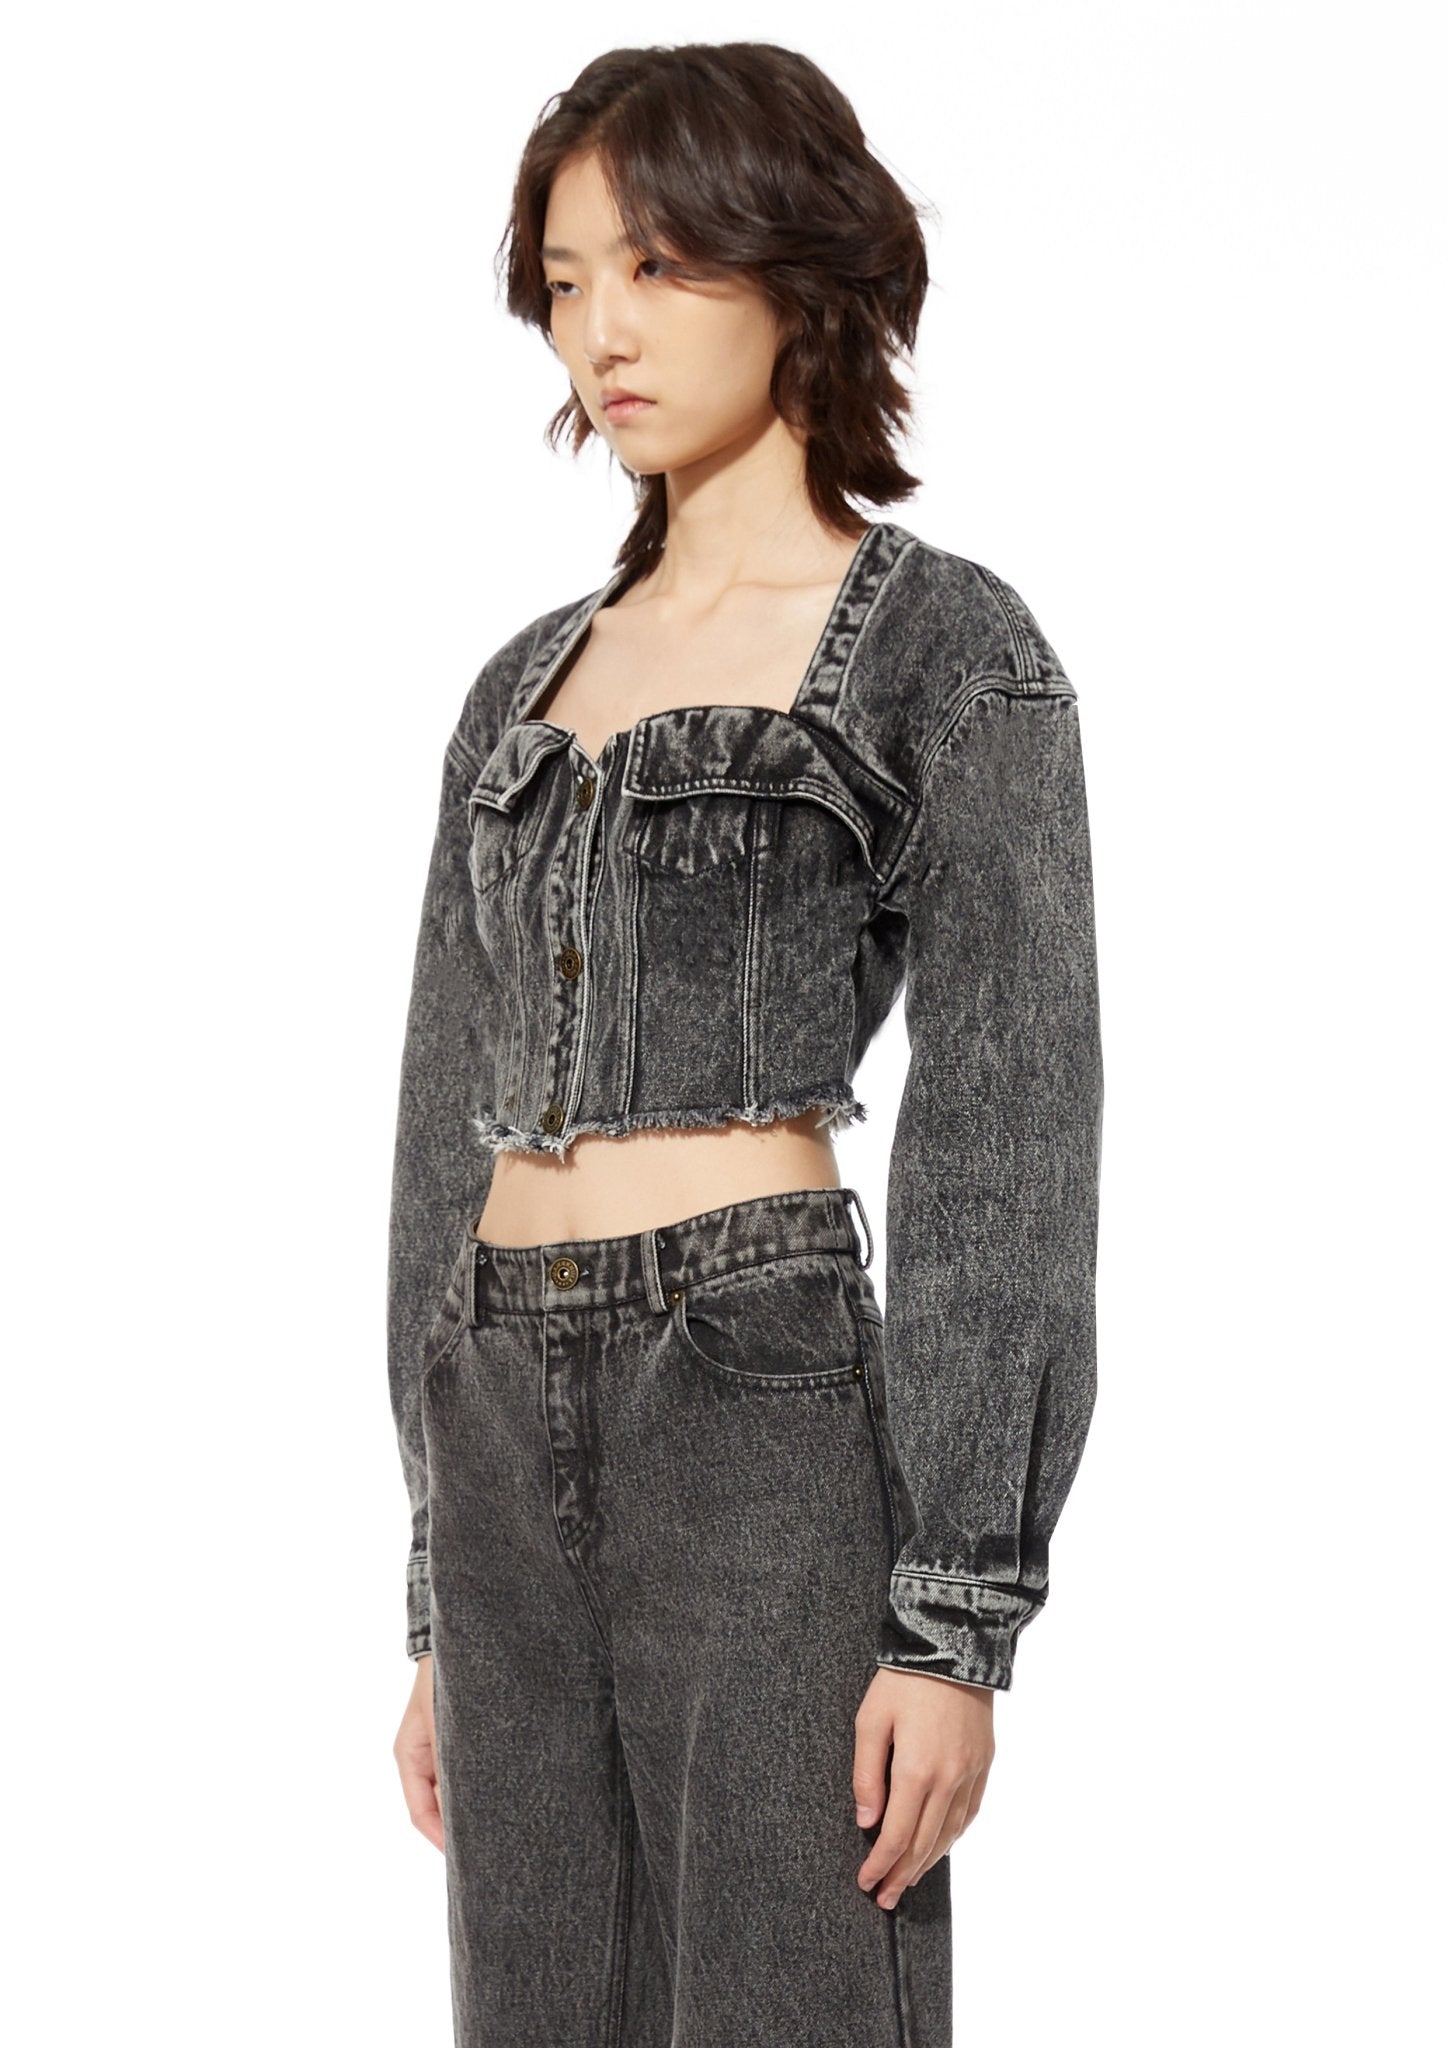 MARRKNULL Black Corset Wash Water Top | MADA IN CHINA